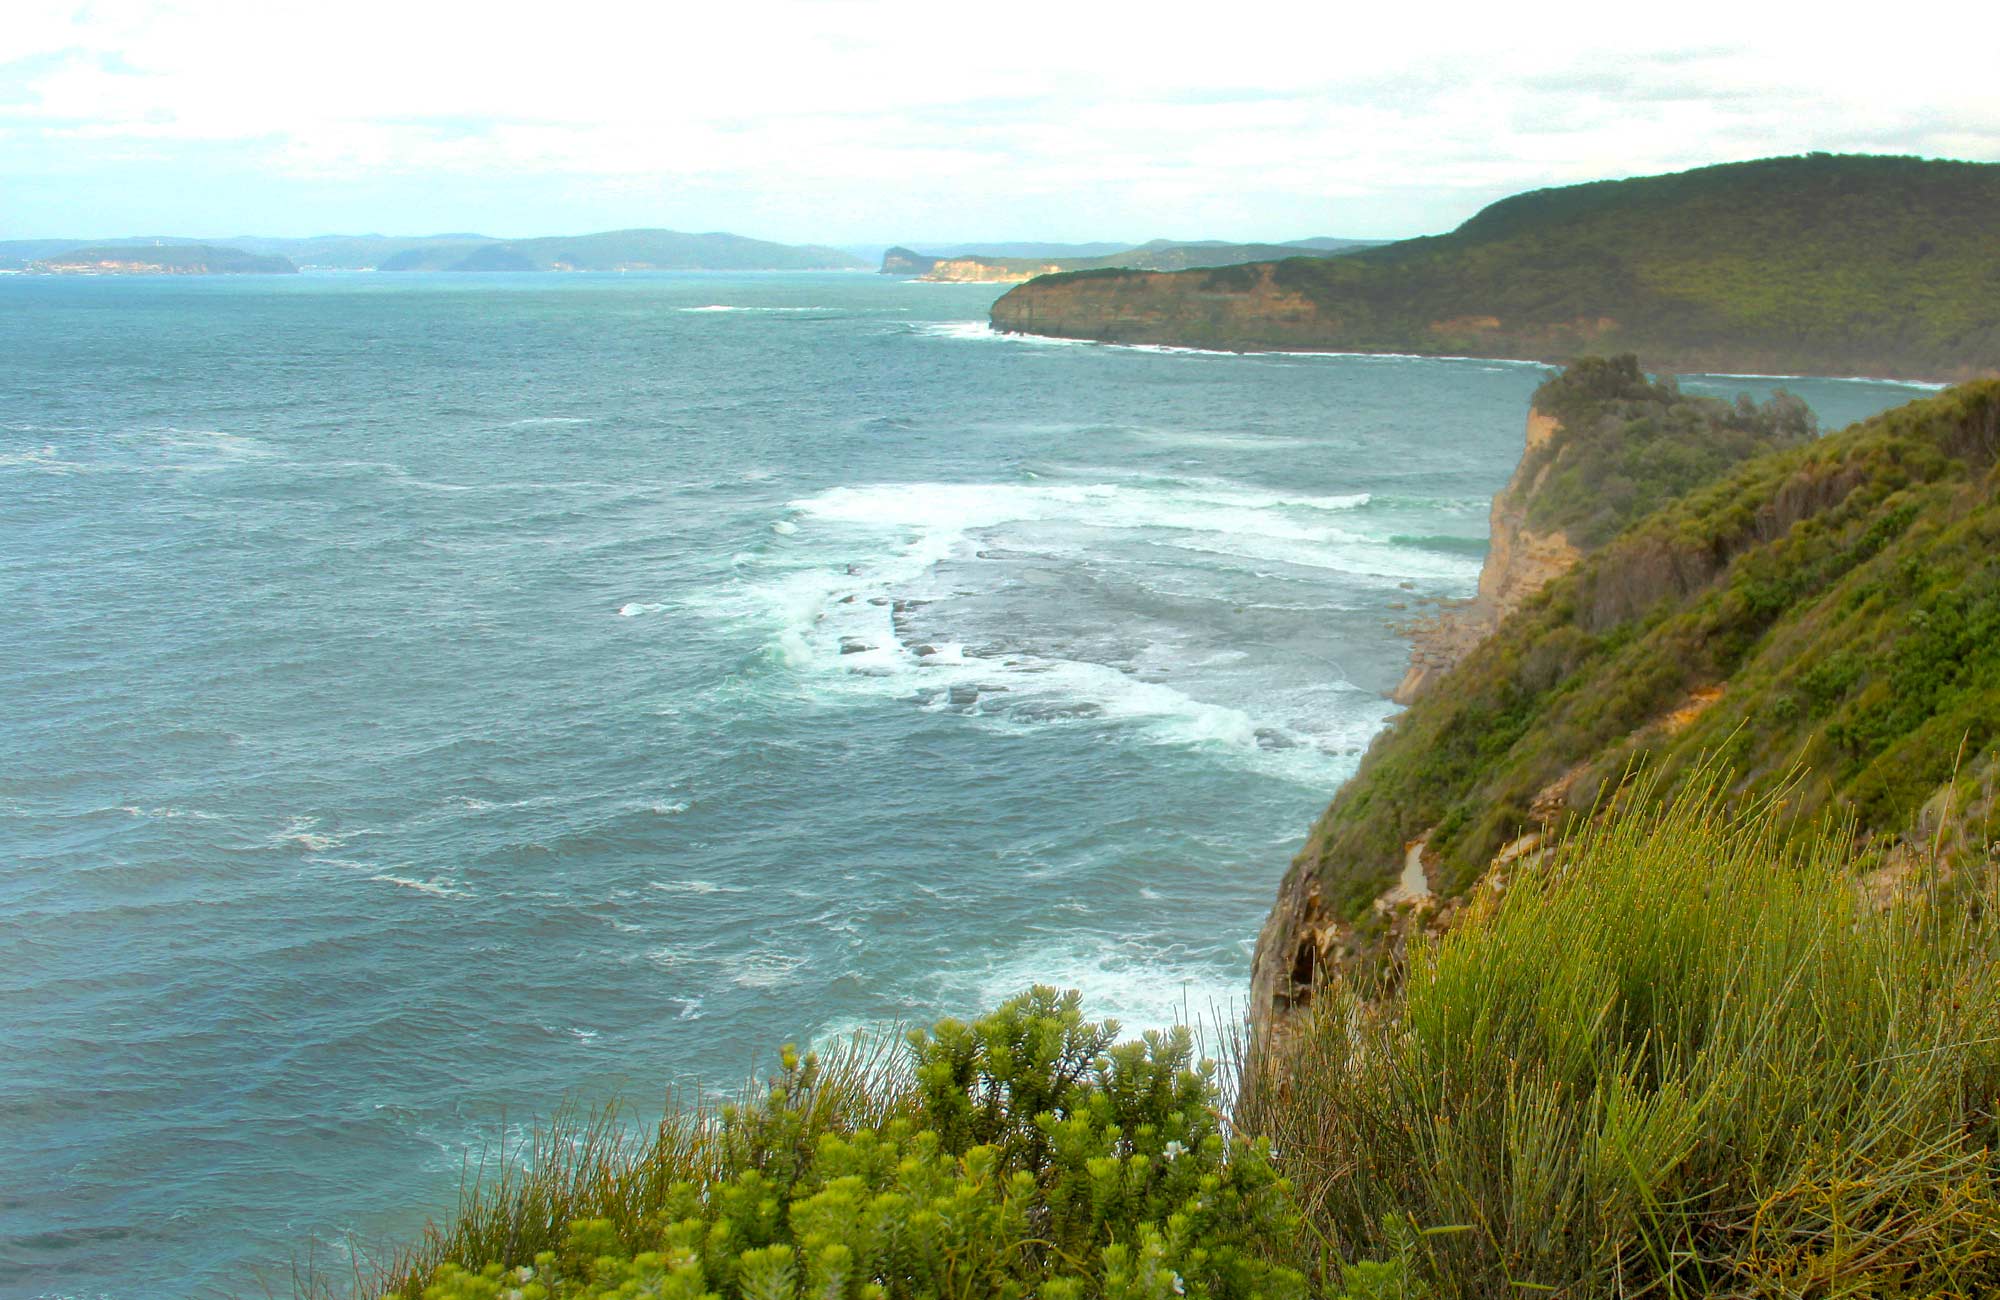 The view of the ocean from the cliffs. Photo: John Yurasek 